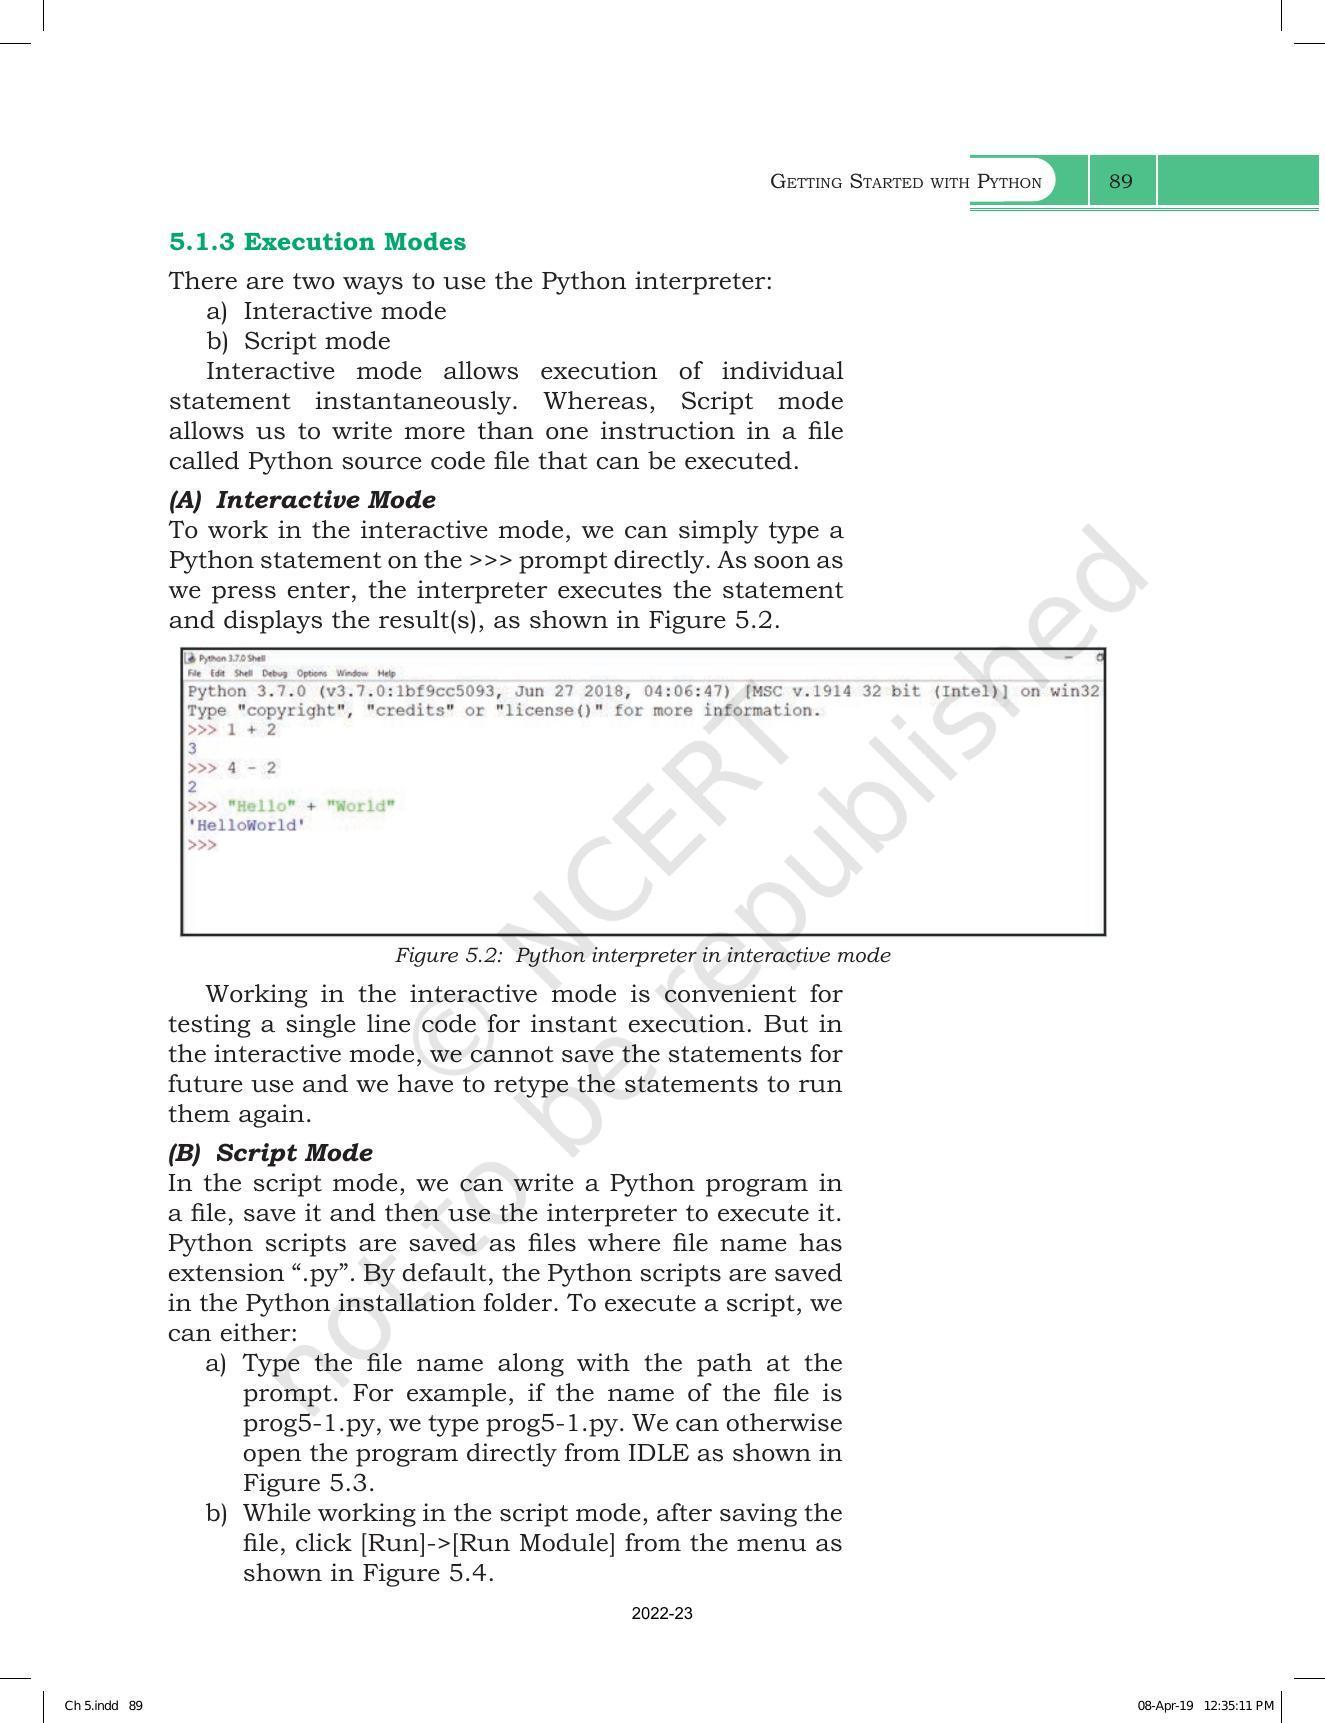 NCERT Book for Class 11 Computer Science Chapter 5 Getting Started with Python - Page 3